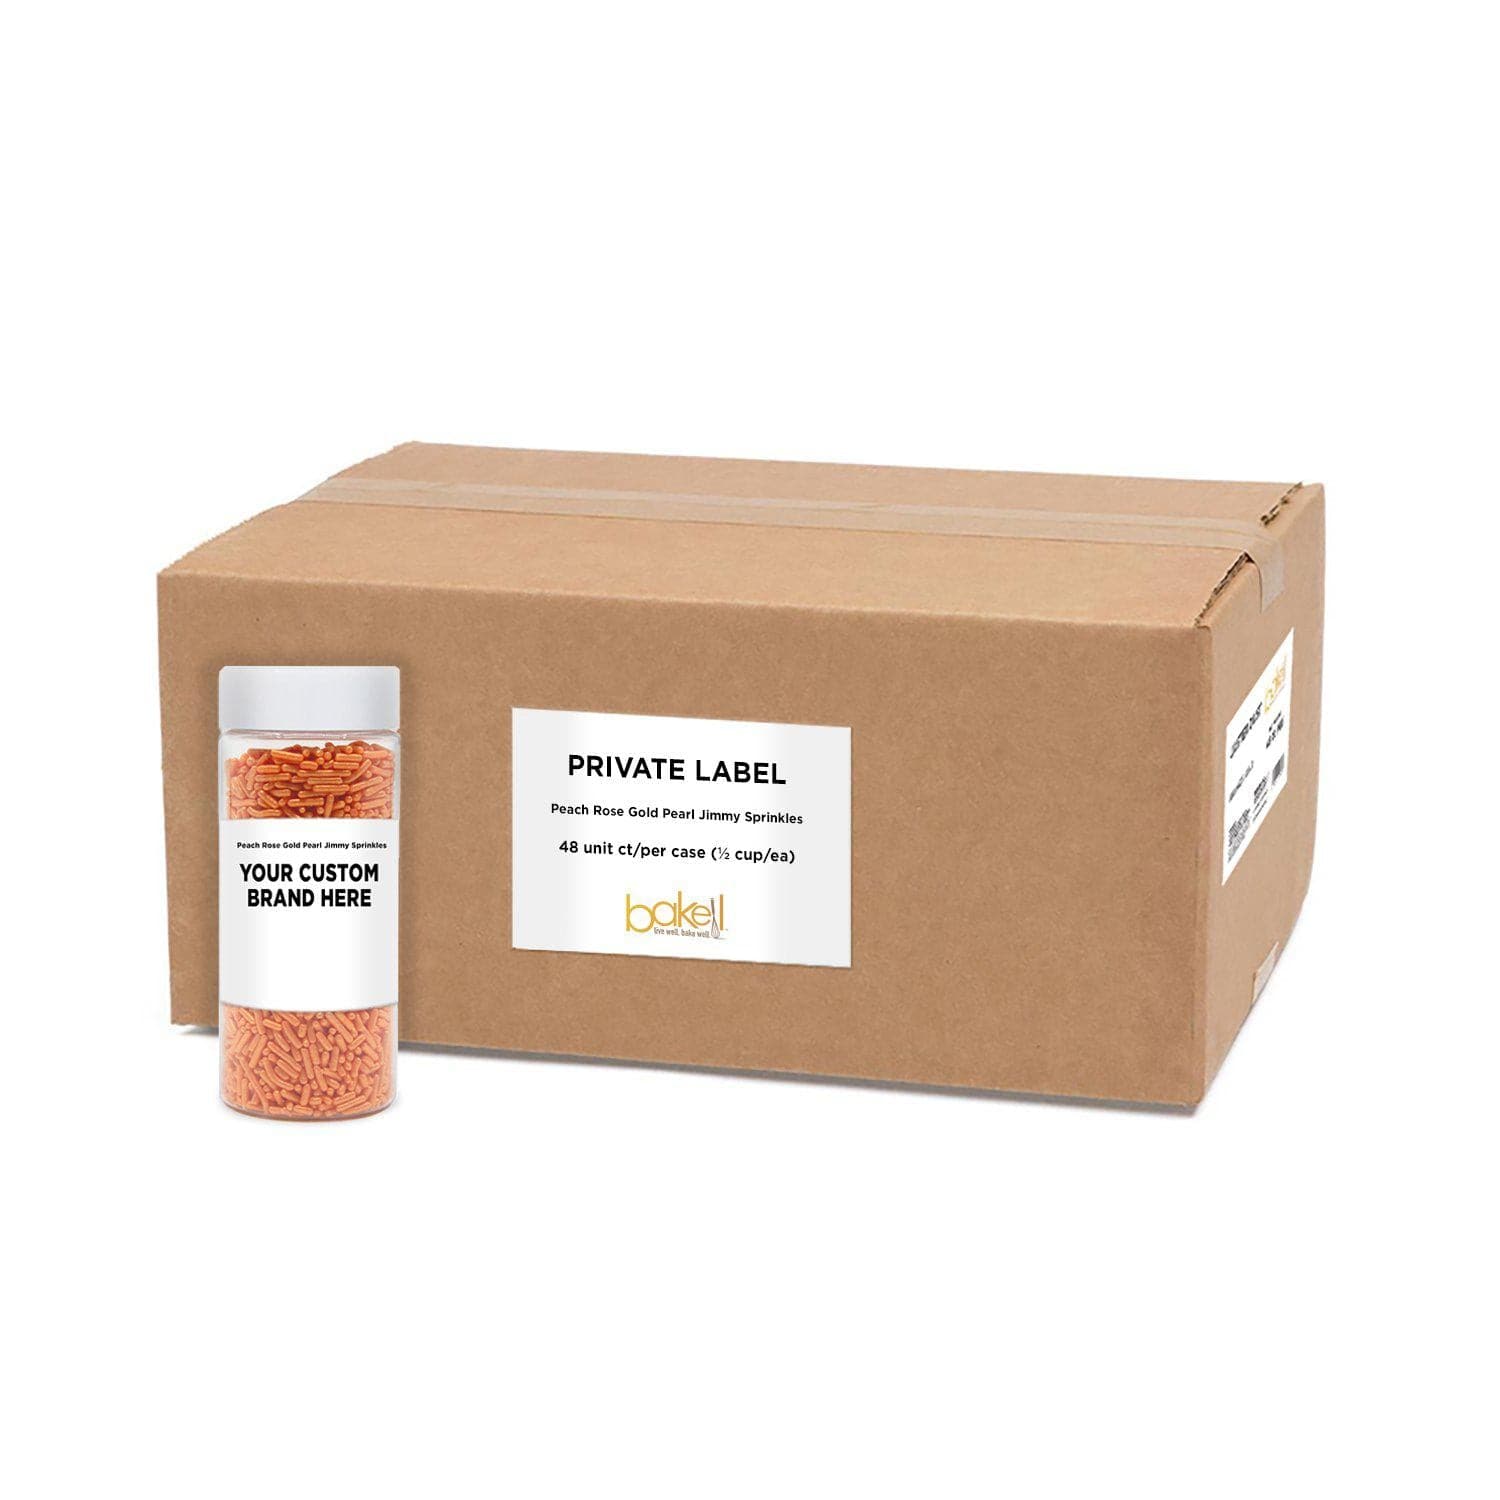 Peach Rose Gold Jimmies Sprinkles | Private Label (48 units/case) | Bakell